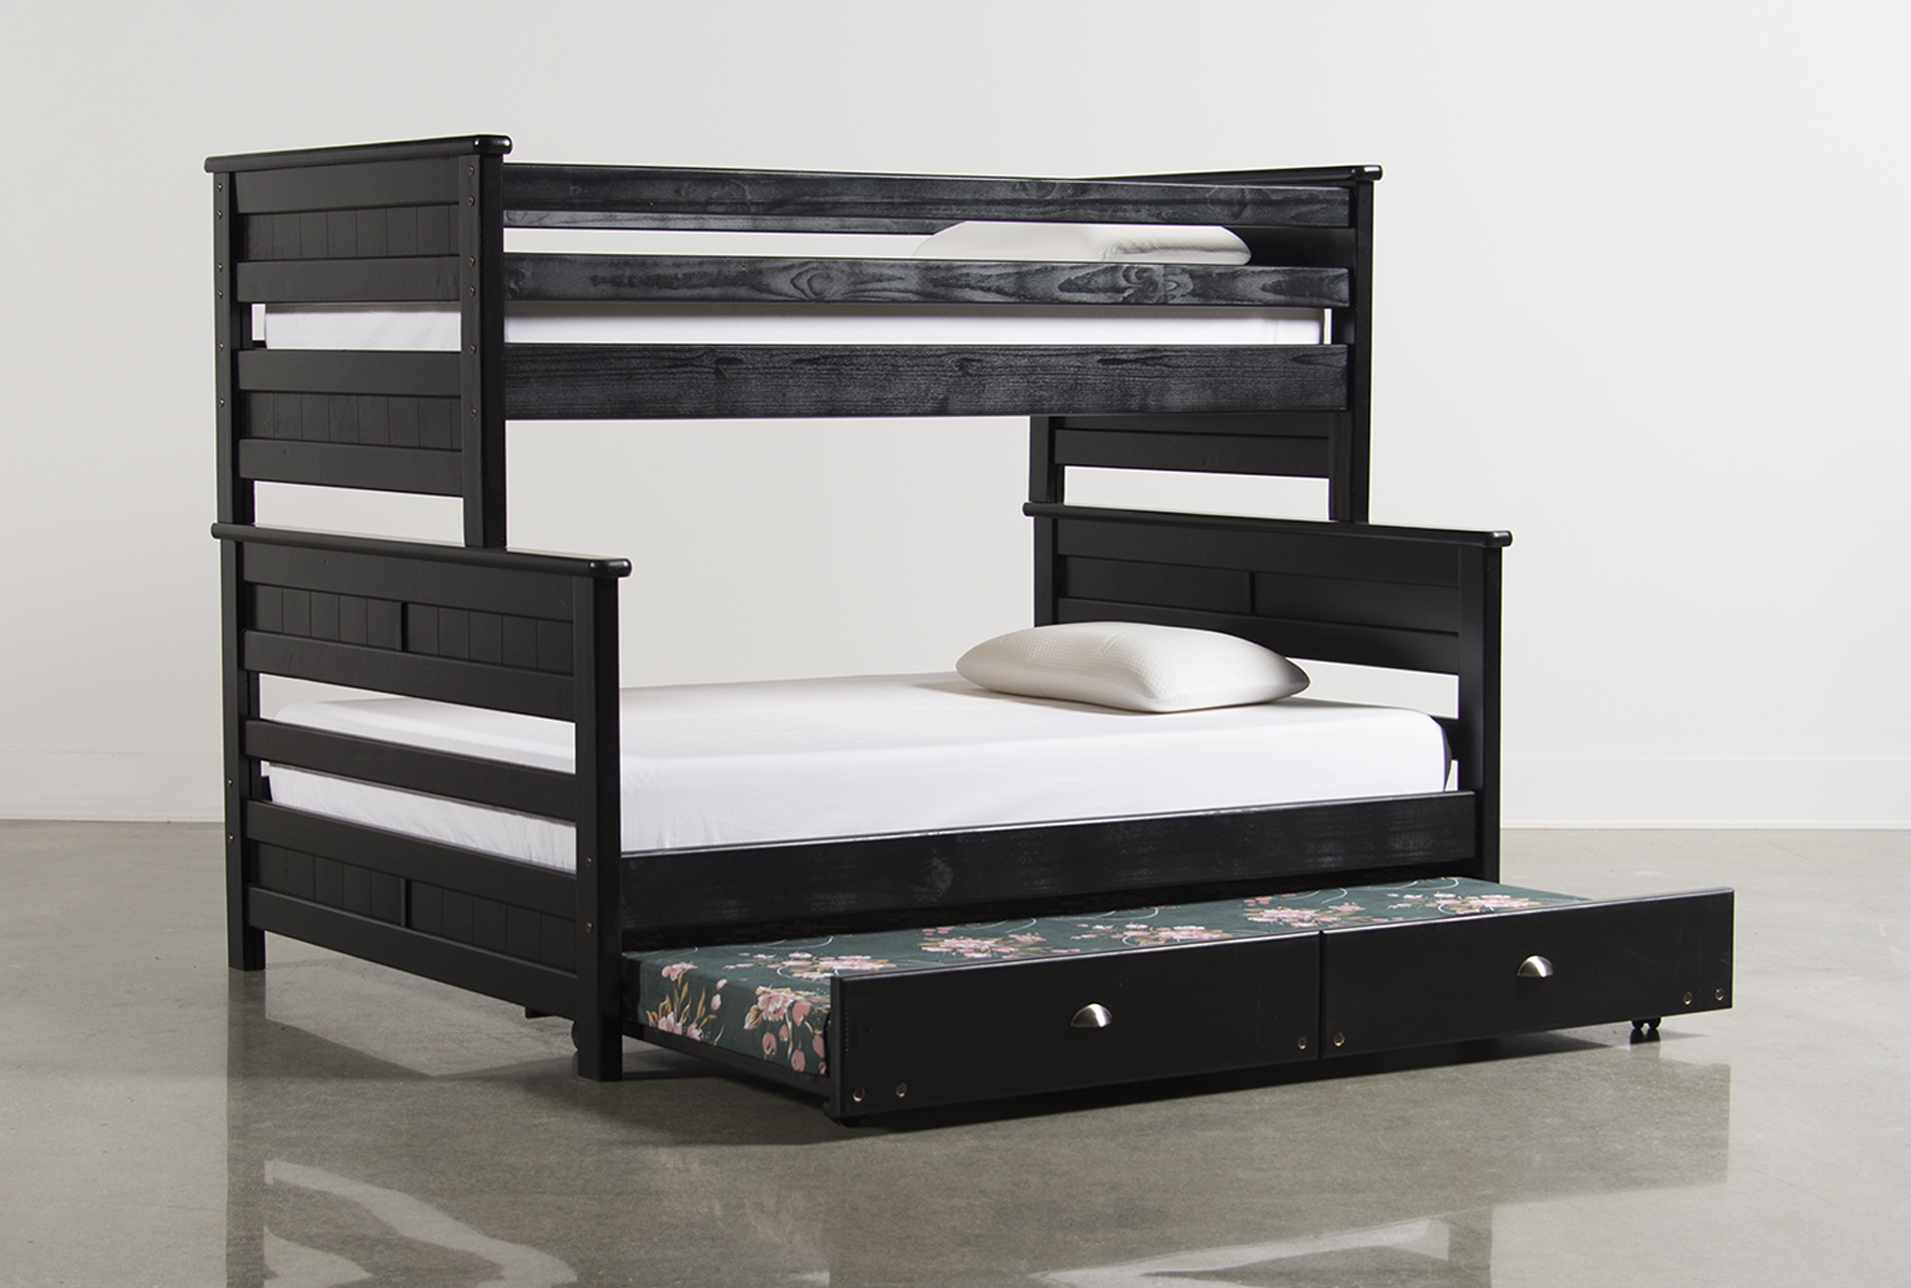 twin over queen bunk bed with trundle